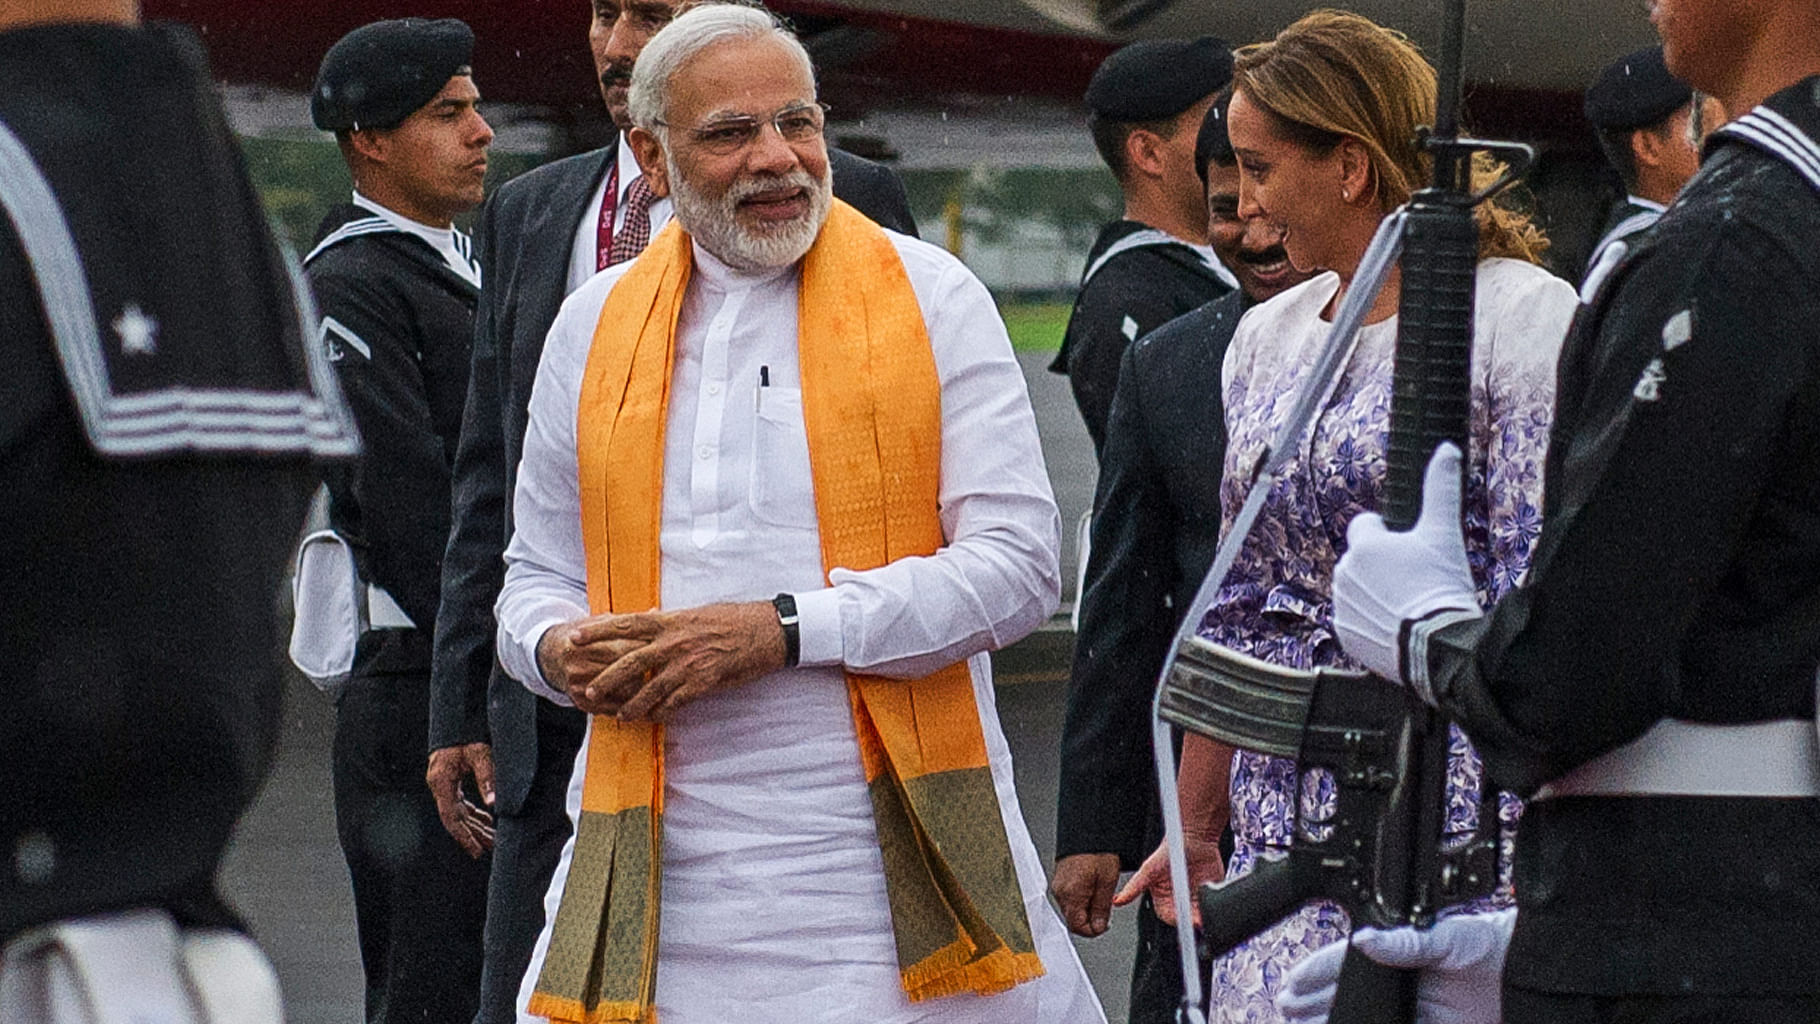 Narendra Modi being received by Mexican Secretary of Foreign Affairs, Claudia Ruiz Massieu, after landing at the Benito Juarez International Airport in Mexico City on 8 June. (Photo: AP)